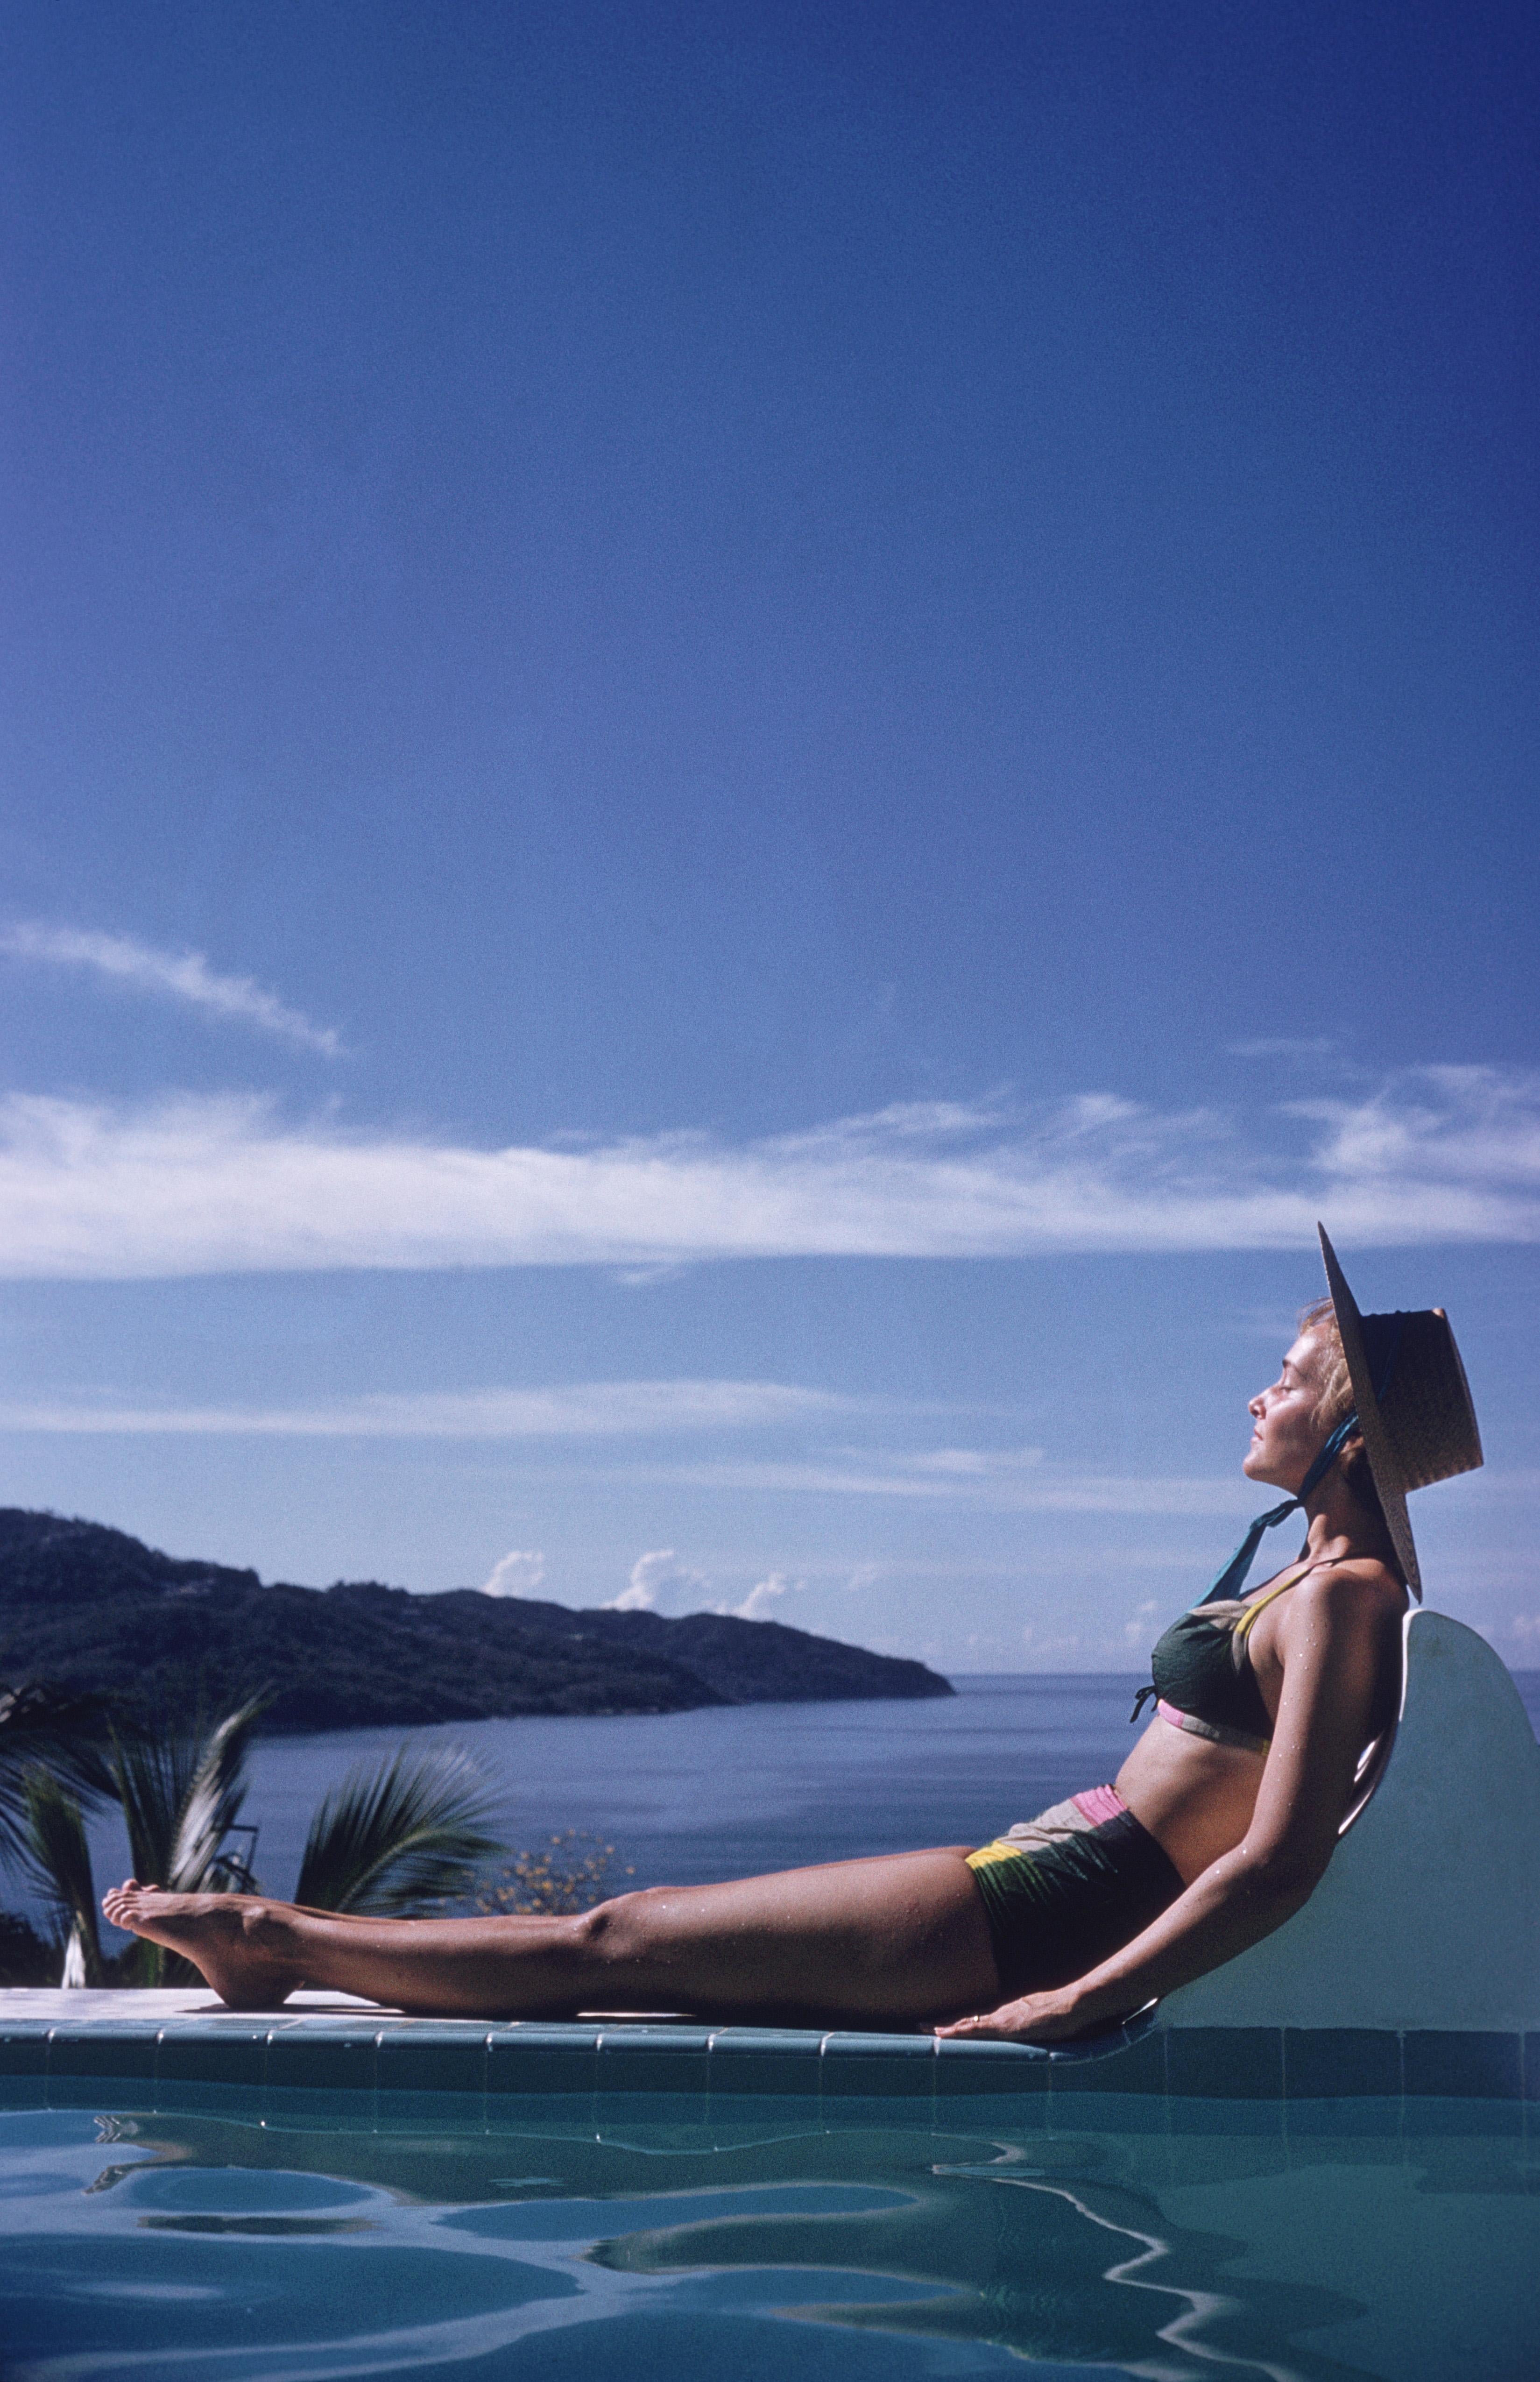 Ingrid Morath sunbathes by a swimming pool next to the sea in Acapulco, 1961. Ingrid was born in Rio de Janeiro and lives in Mexico City.

Portofino Villa
Slim Aarons Estate Edition
Chromogenic Lambda print
Printed Later
Slim Aarons Estate